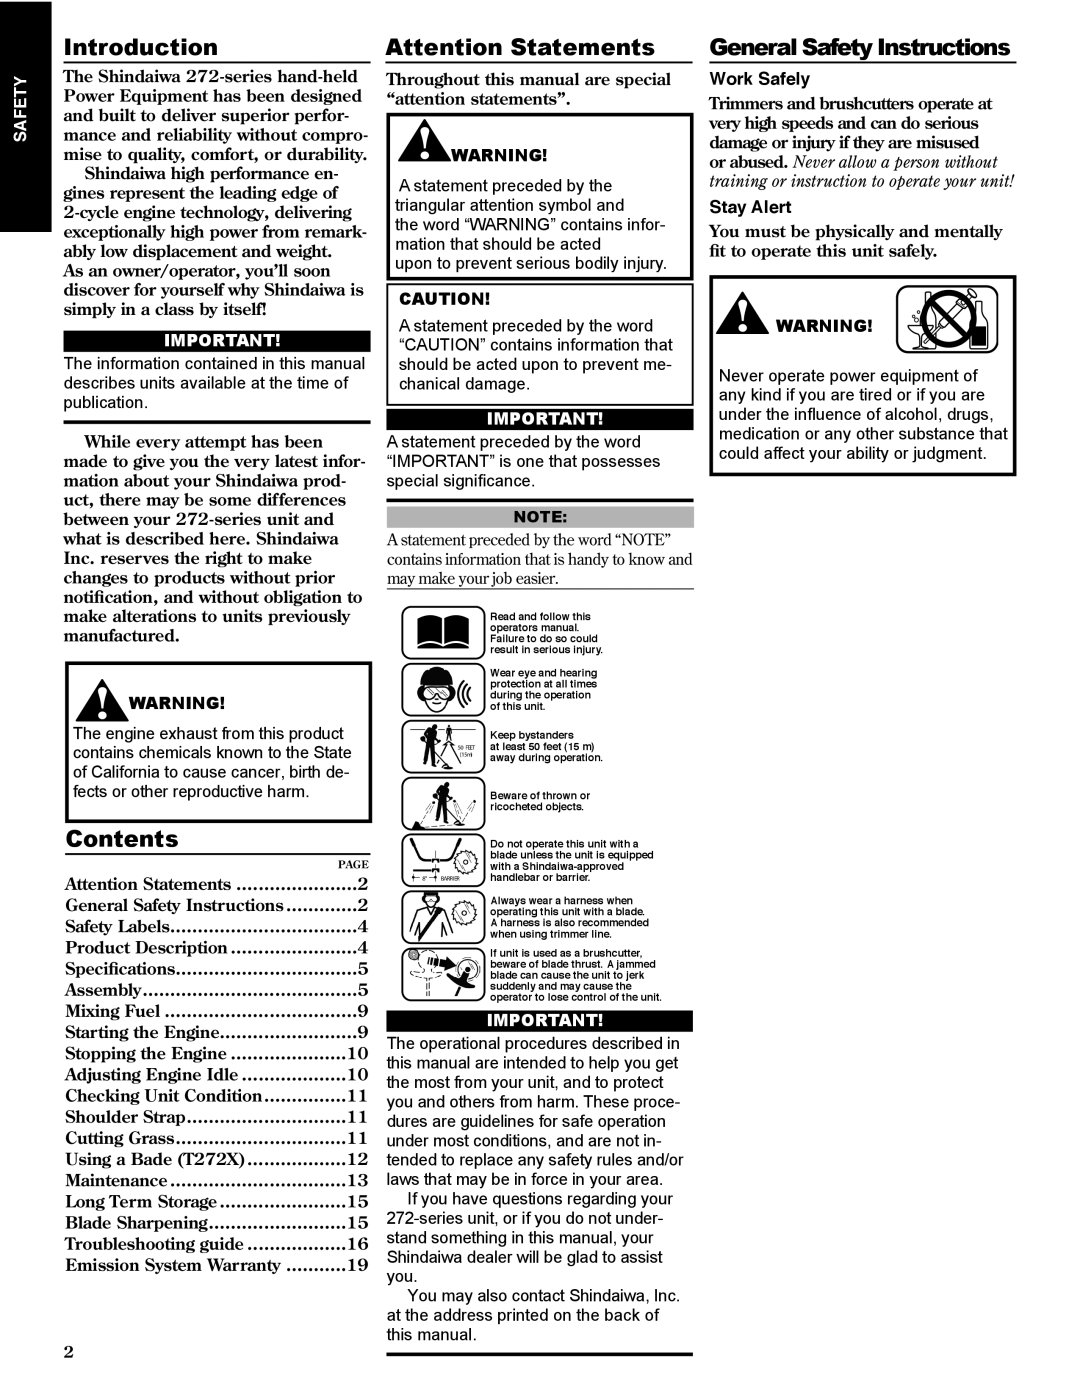 Shindaiwa 80974 manual Introduction, Contents, Attention Statements, General Safety Instructions 